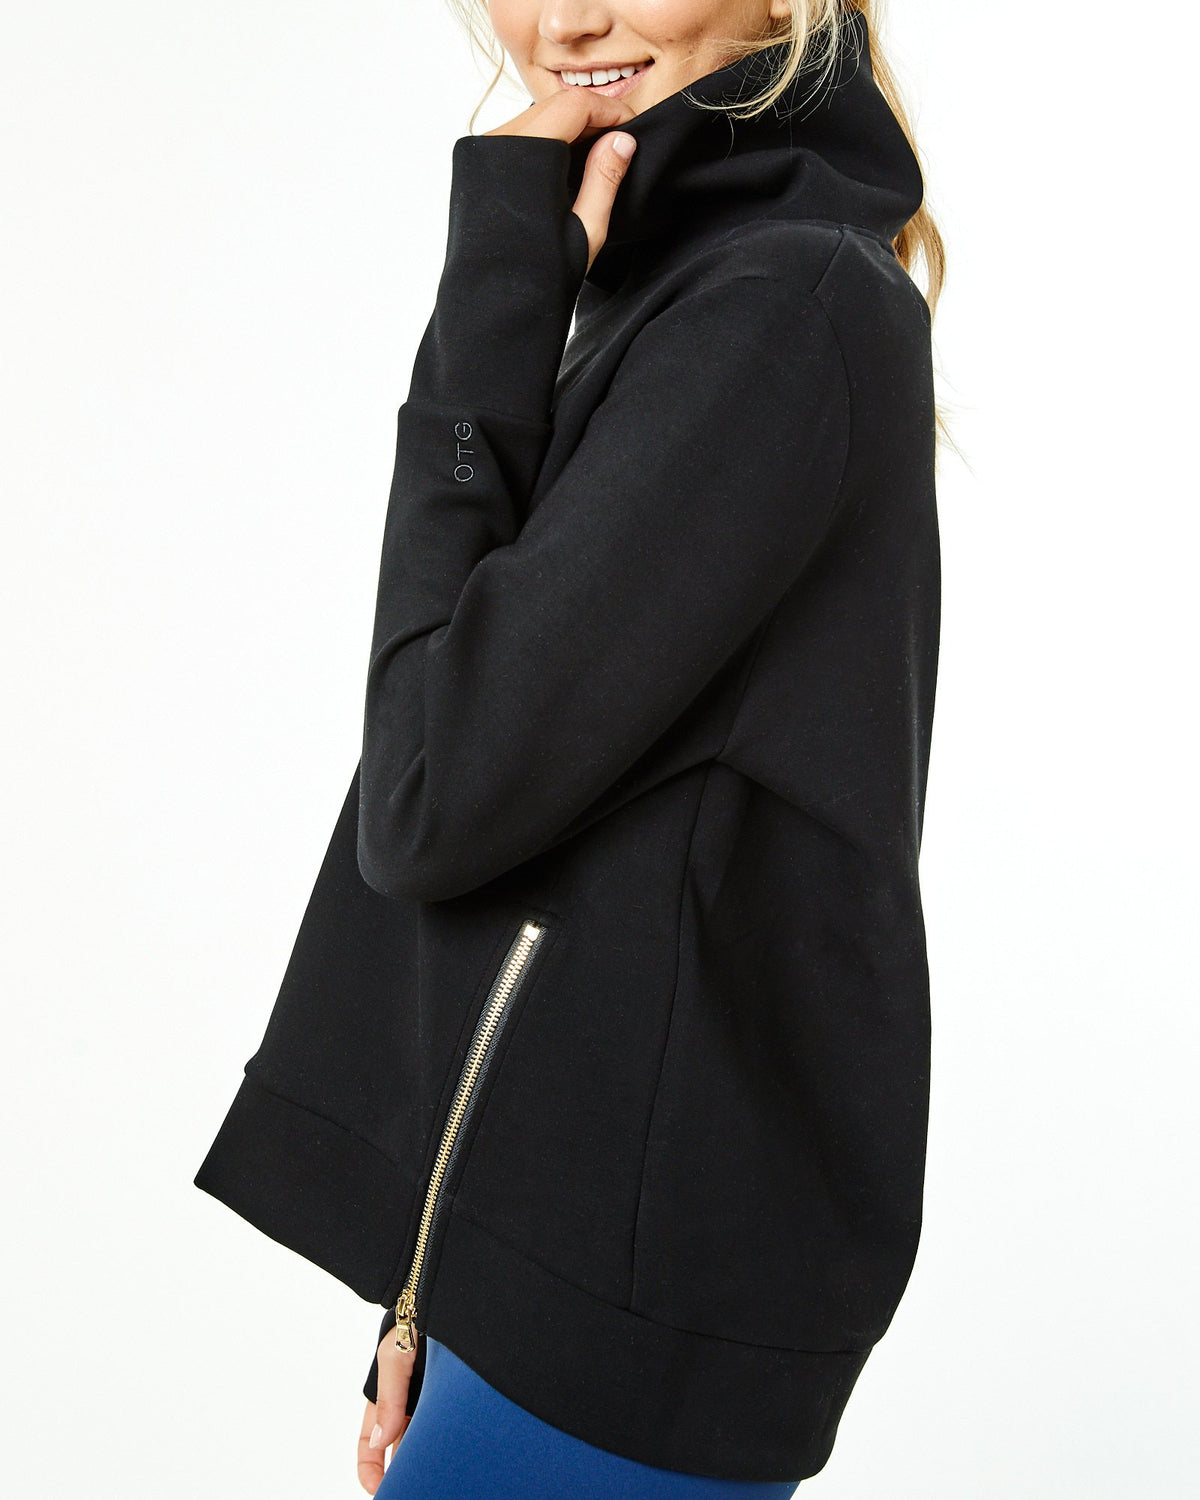 The Everyday Pullover in Black